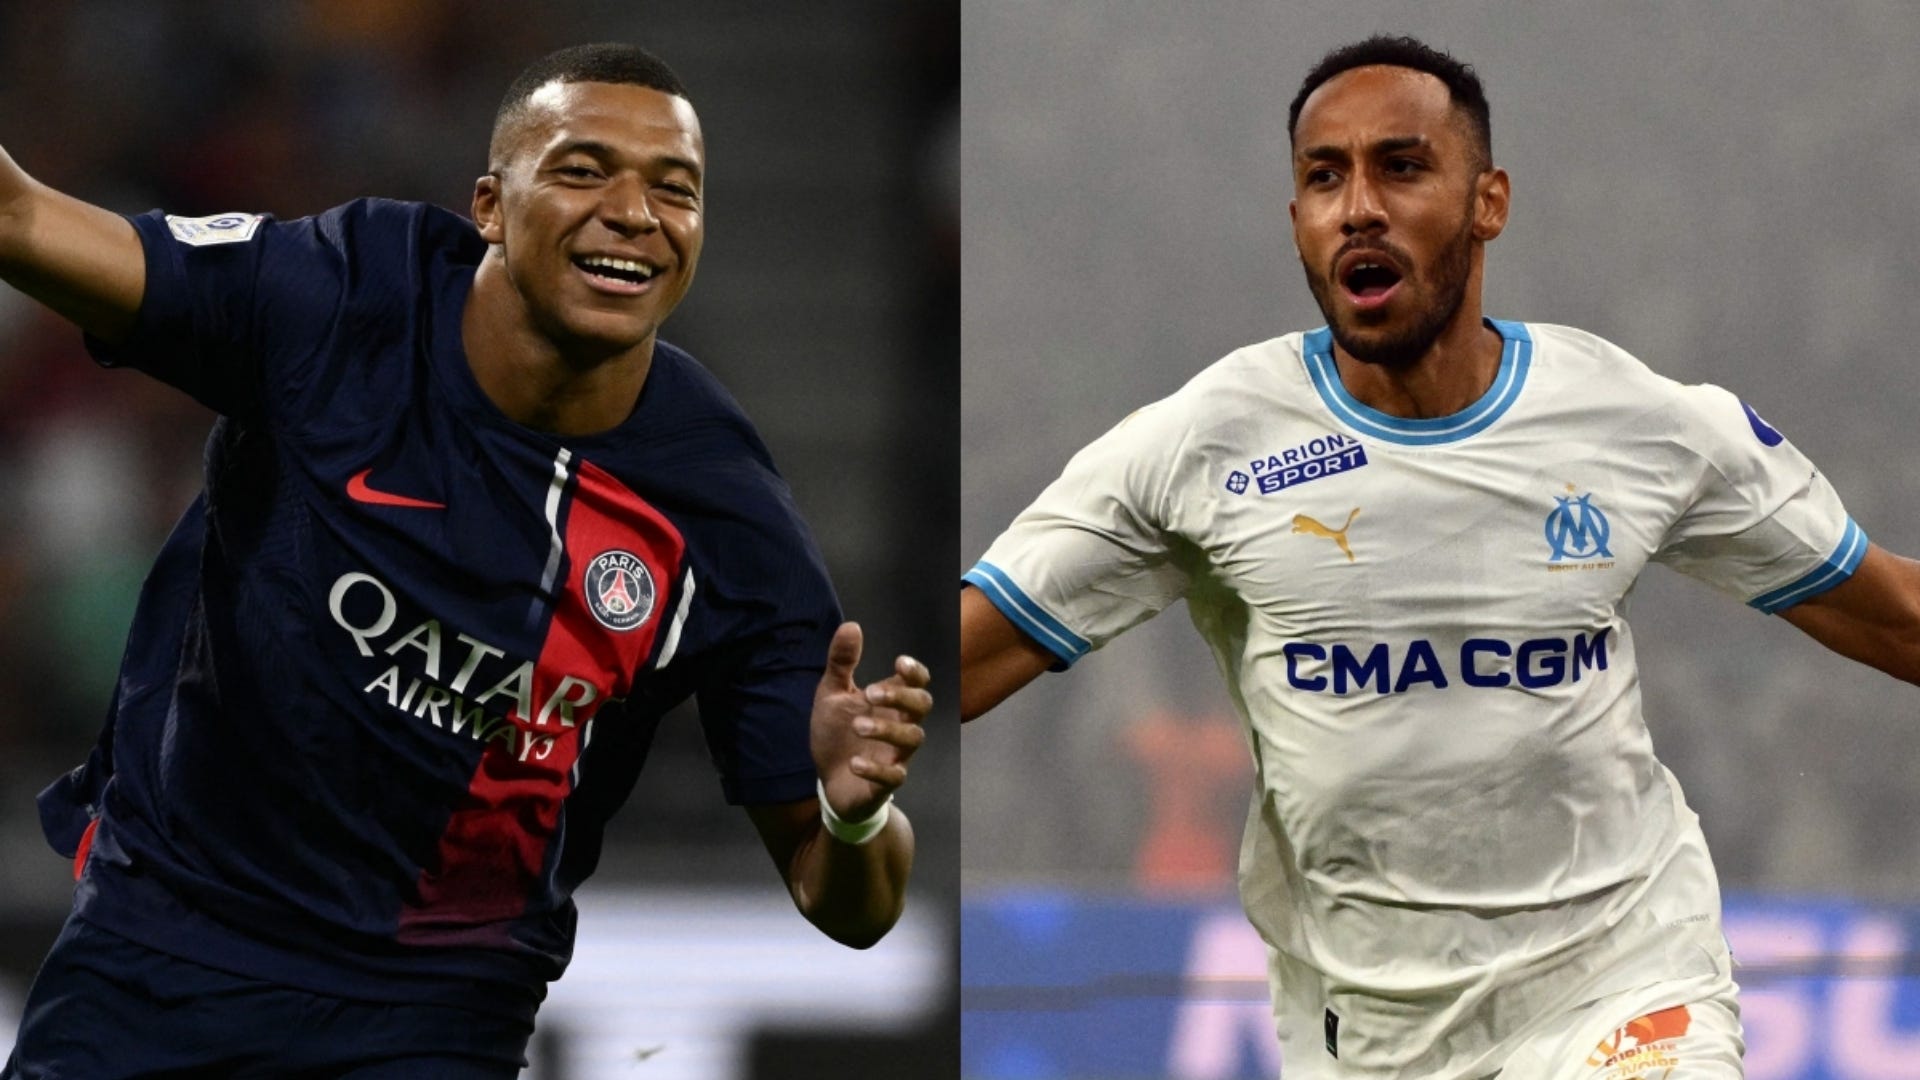 PSG vs Marseille Where to watch the match online, live stream, TV channels, and kick-off time Goal US